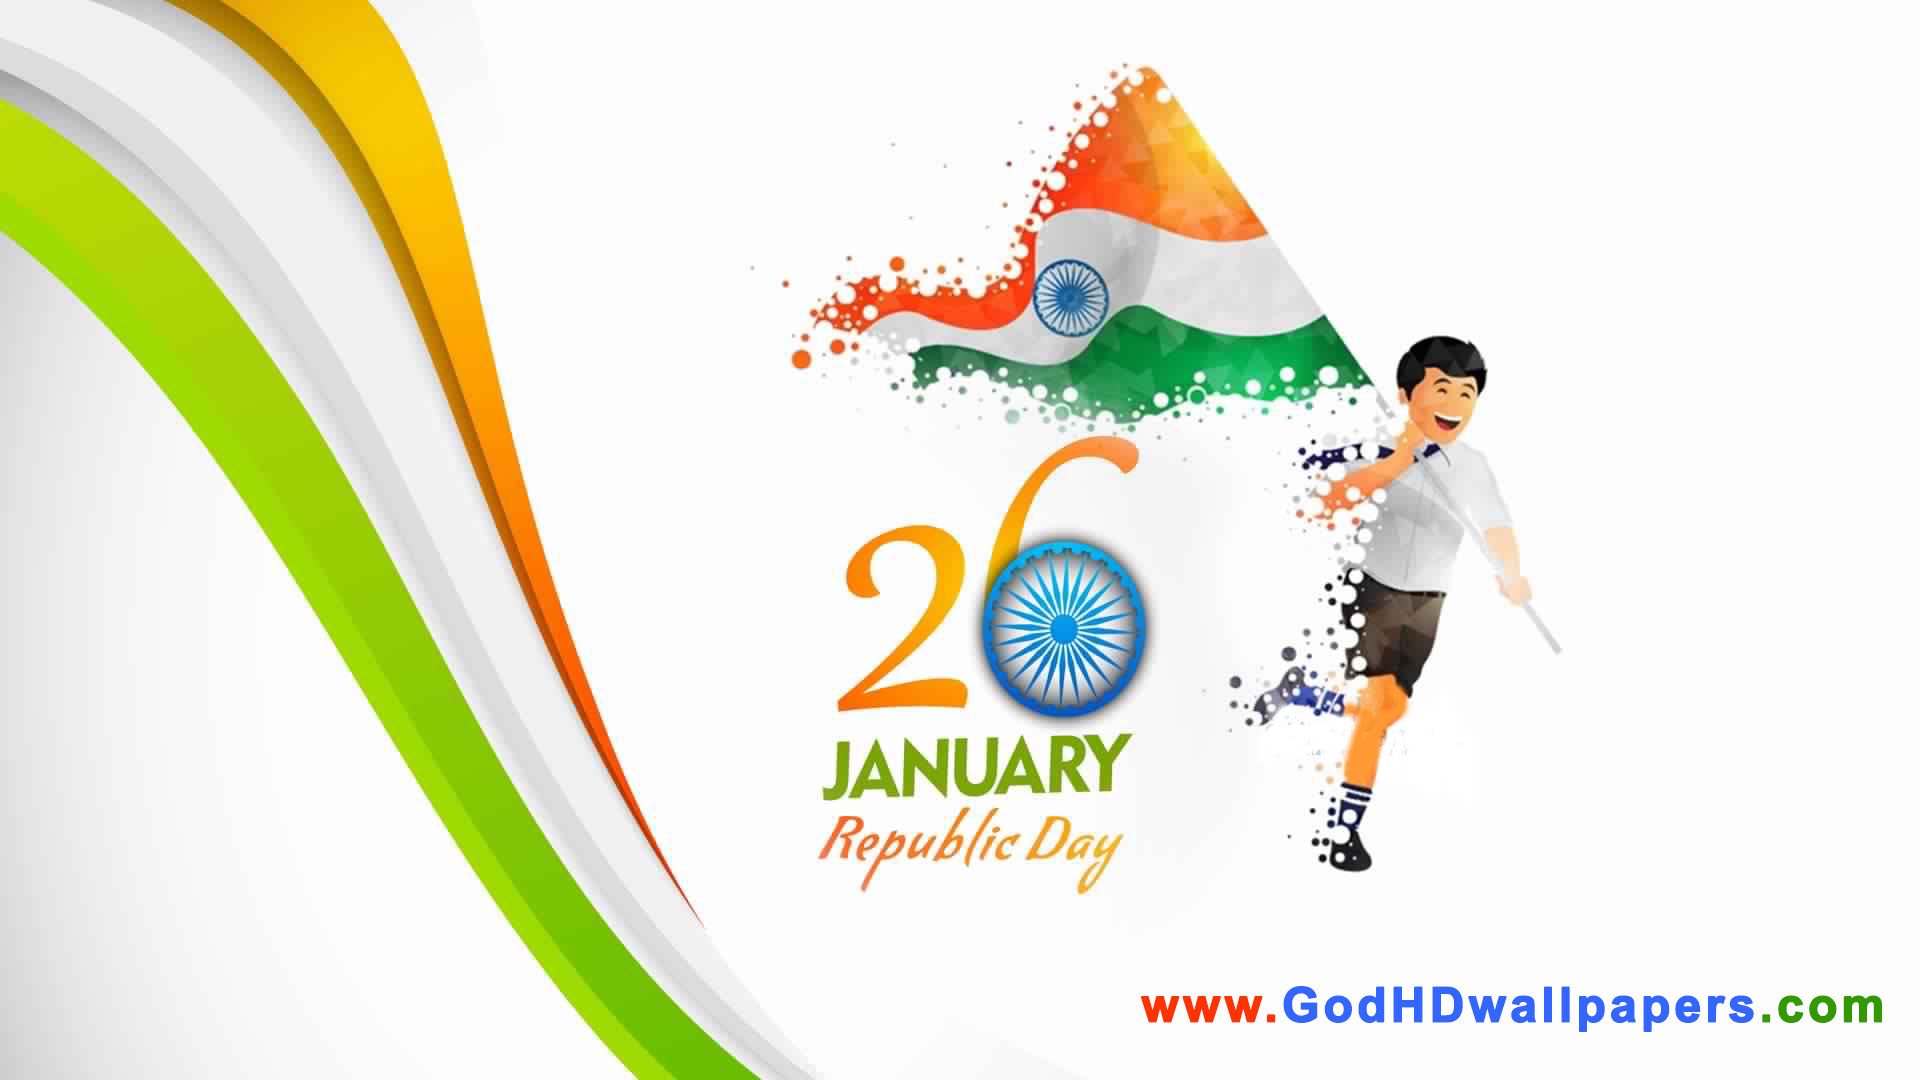 Happy Republic Day India - God HD Wallpapers